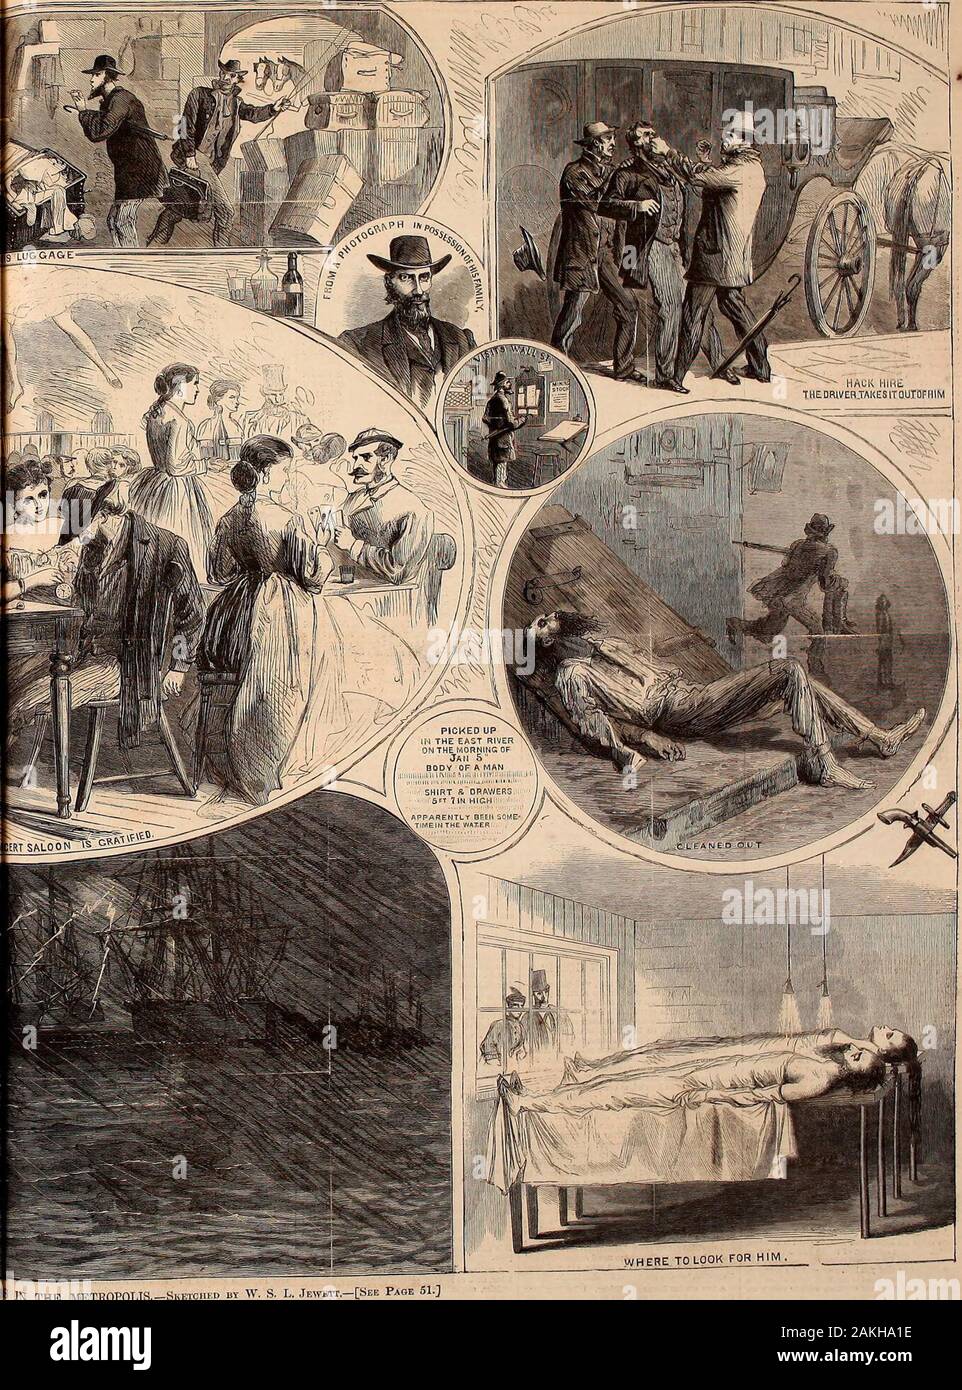 Harper's weekly . THE ADVENTURES OF A MISSING MANs 01!, TWEXTY-EOUR HOI. INT THE METROPOLTS.- cnED ux W. S. L. Jewett—[See Page 51.] riAi;ii:j;s wf.f.u.y. [January 26, 1867. THE COQUETTE OF AELON. ;?;,;:,: In Ihc projected comedy, he rflic coquette, finding him bo ? ?nr-Hy, UUrJjr had takei e apparition held a lighted ,.- lucky lbi.1 il «:r, ..f hlu] .V.nc..r ? il i-lli/ht c.Hi.L-ti ii&lt;iw g( up Id MViiCir-I li.- mr-c/c.I twice. N.il In-ill^ :iUle to I lii.n.iru. .-:ir&gt;. CBlasdlslill^ll^he.ll.ii.^.-lfiin.l.T th-.e trvih - n 1 ^i*.-J I ;, n I ) 11DMK ,M&gt; rni;j;i,; , ?vhich she ventur Stock Photo